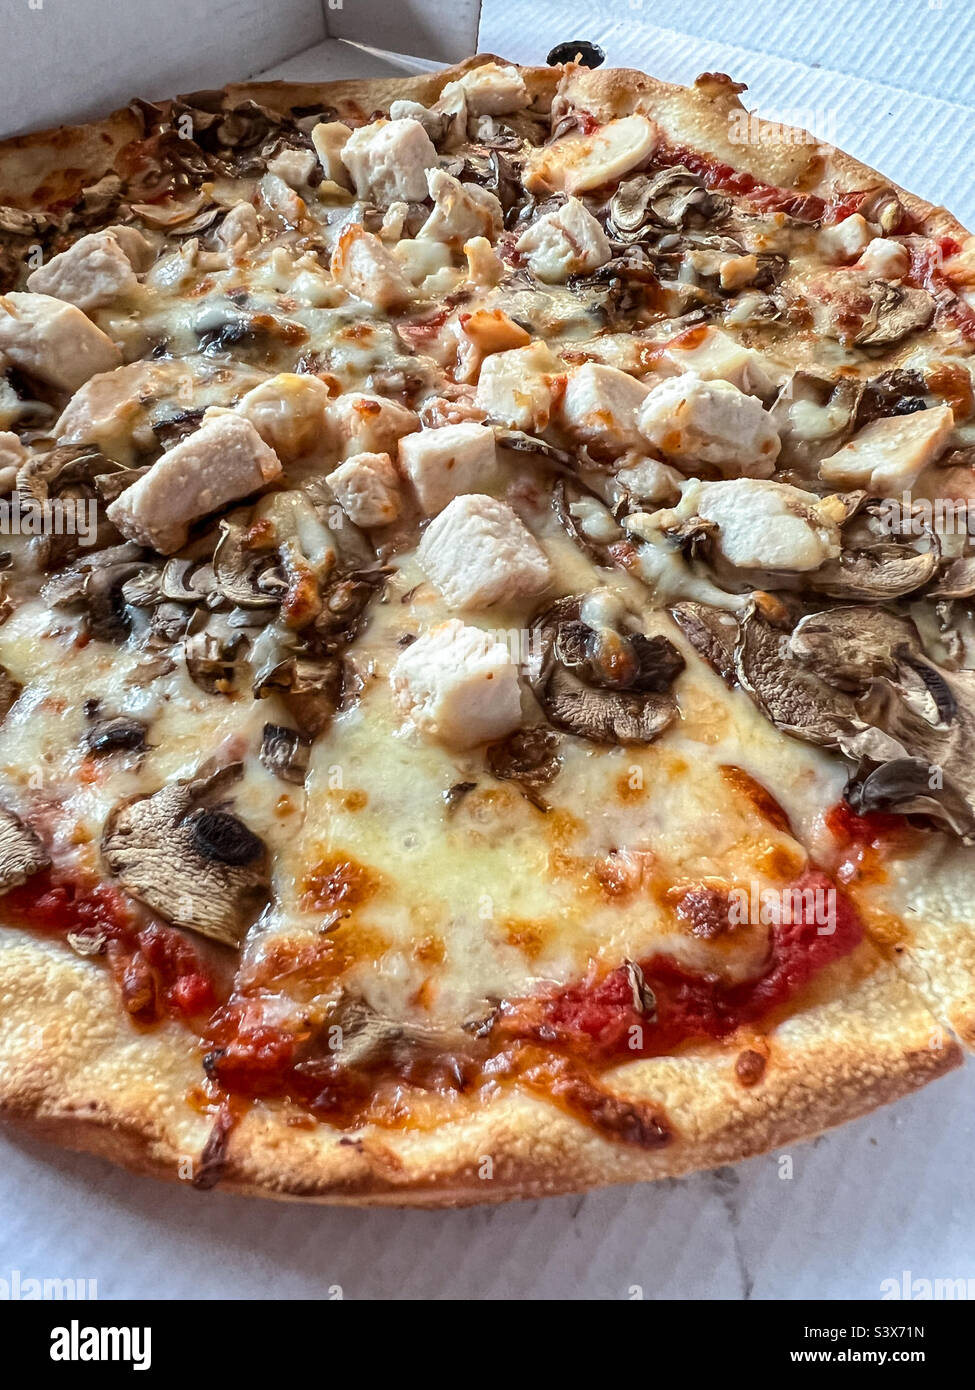 Chicken and mushroom pizza takeaway Stock Photo